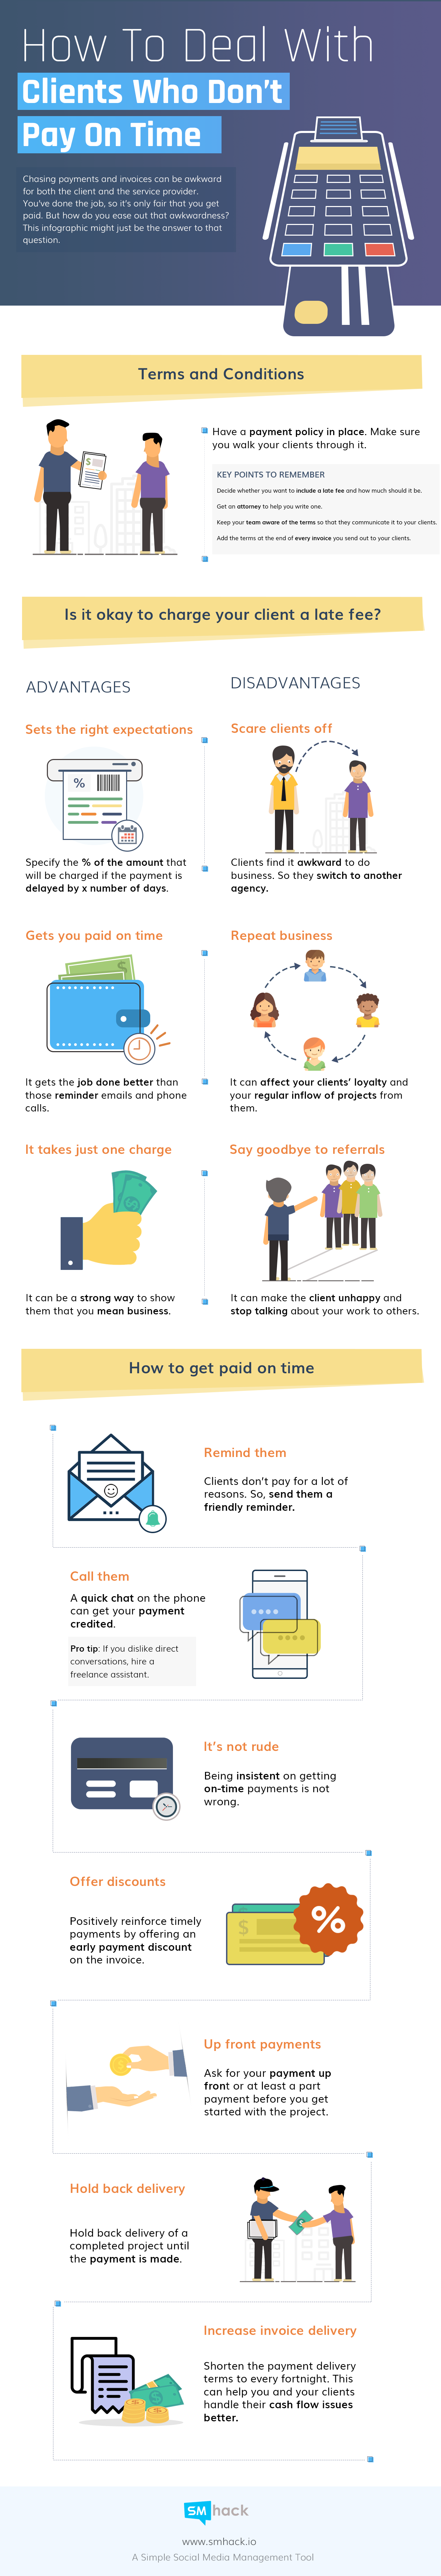 How to Deal With Clients Who Don't Pay on Time - #Infographic